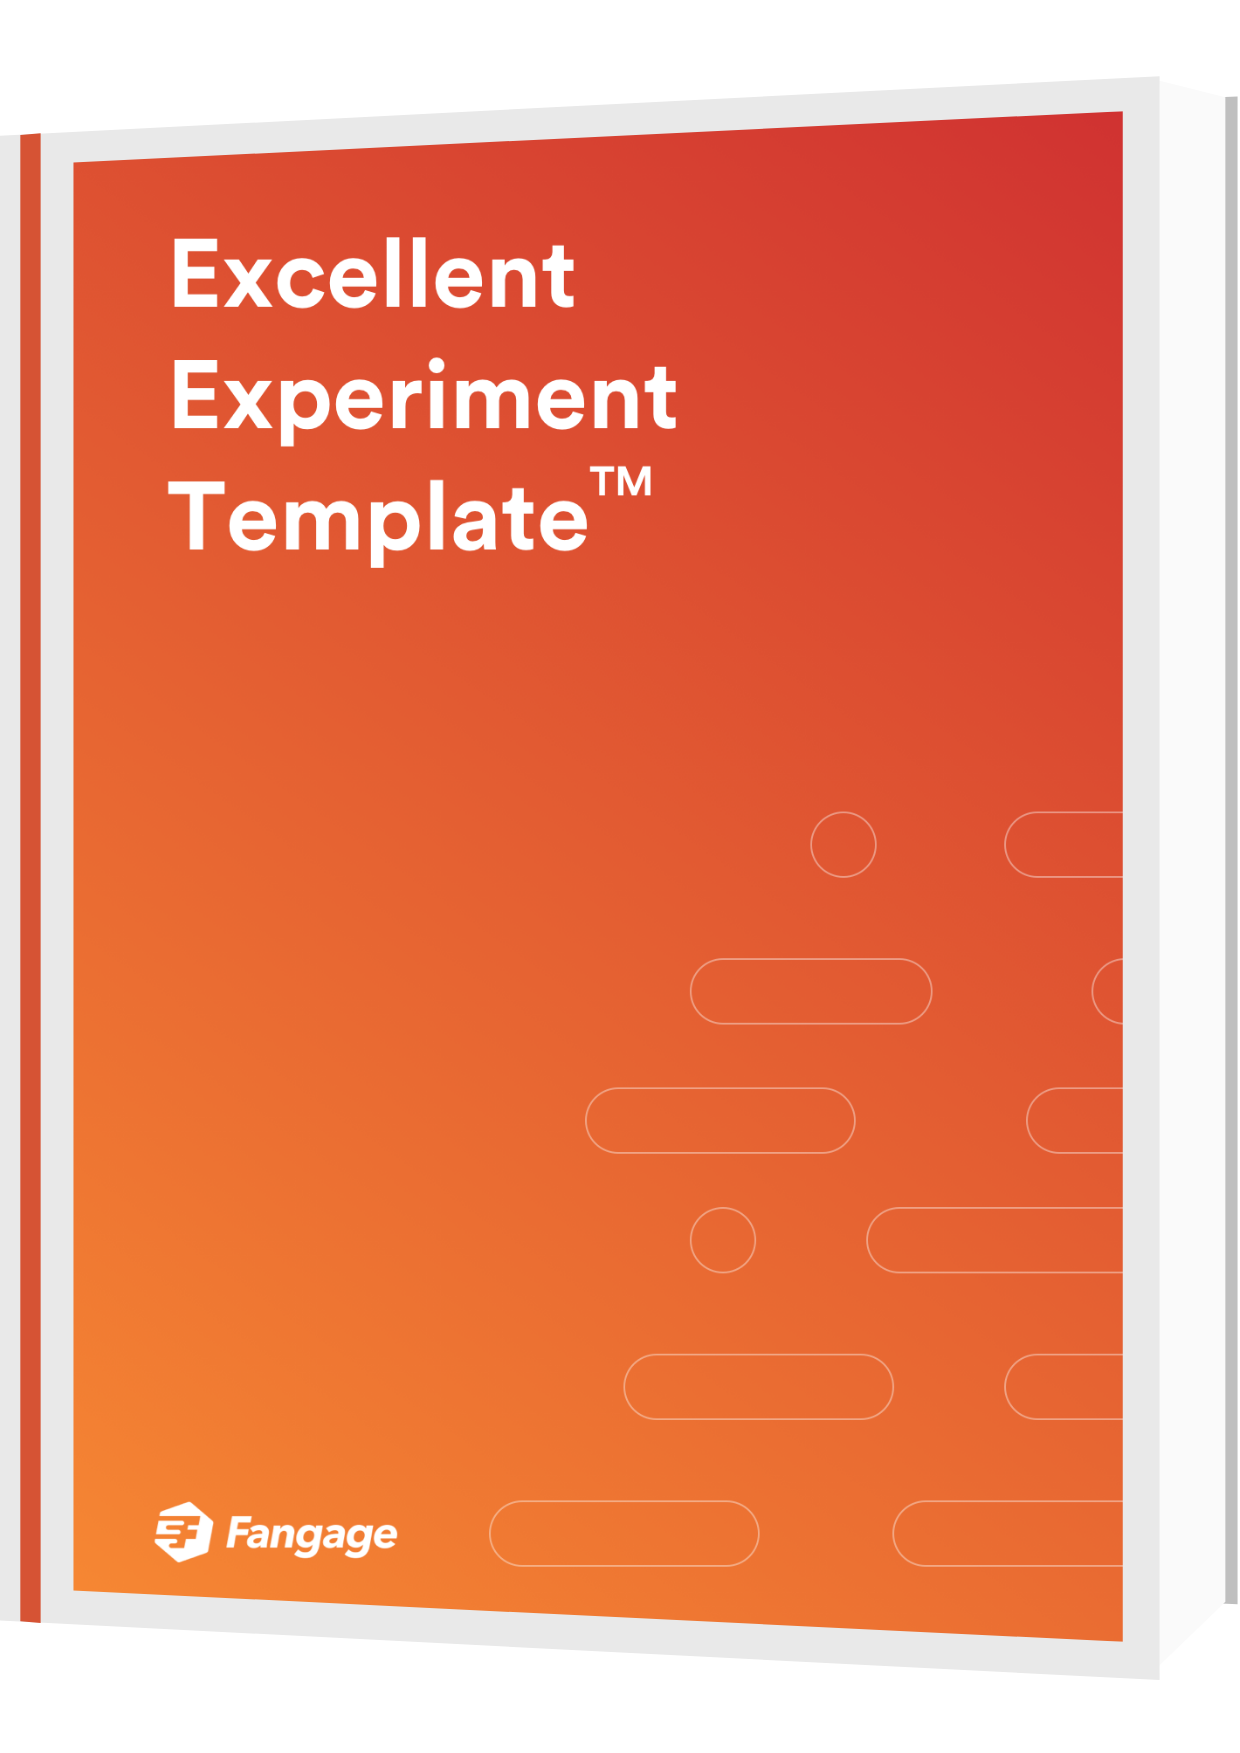 Excellent Experiment Template - www.fangage.com